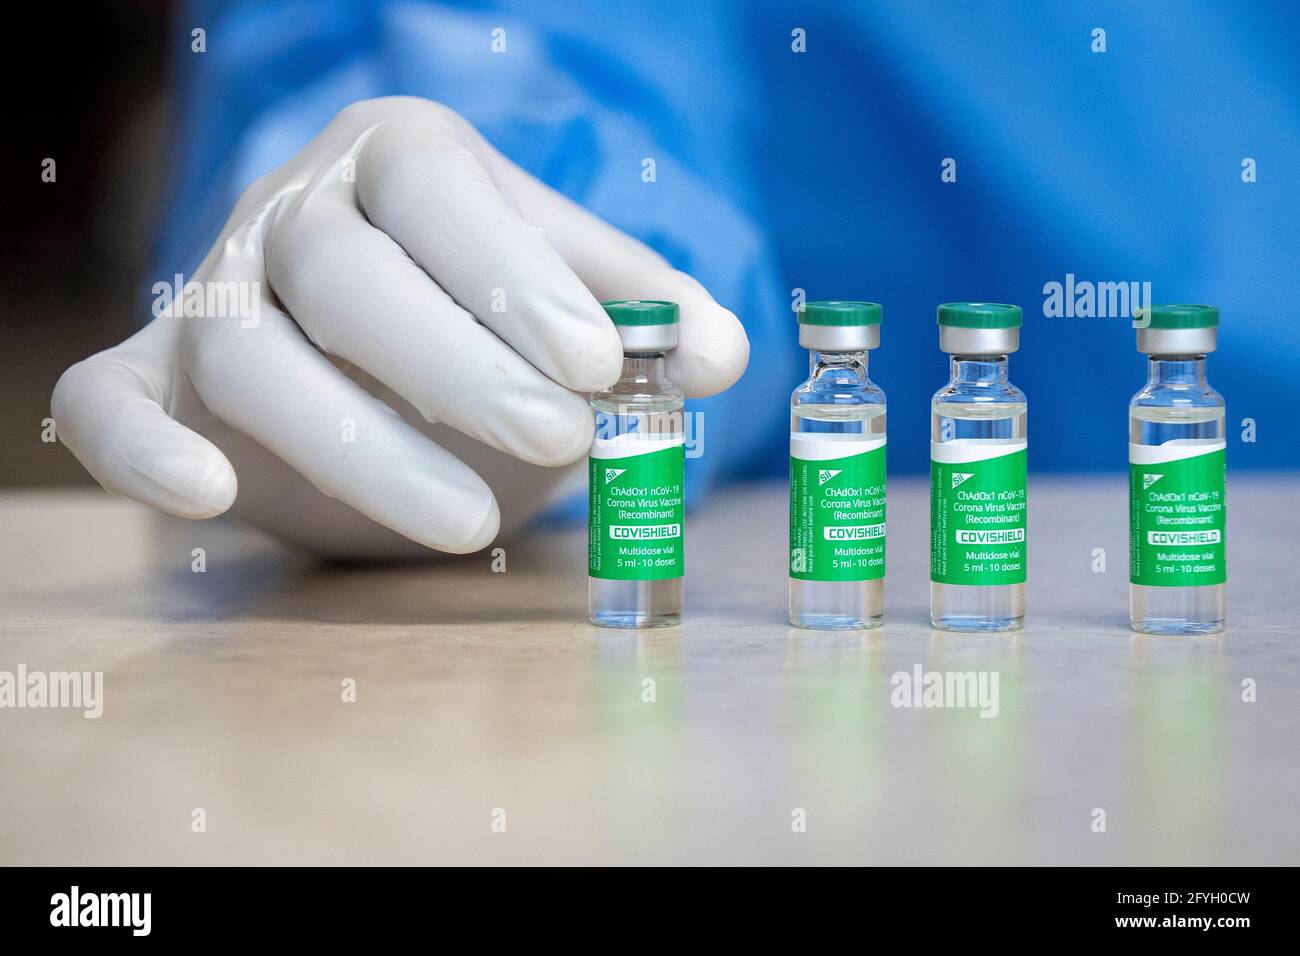 Several vials of the AstraZeneca COVID-19 vaccine at a pharmacy in Kingston, Ontario on Thursday, March 18, 2021, as the COVID-19 pandemic continues a Stock Photo